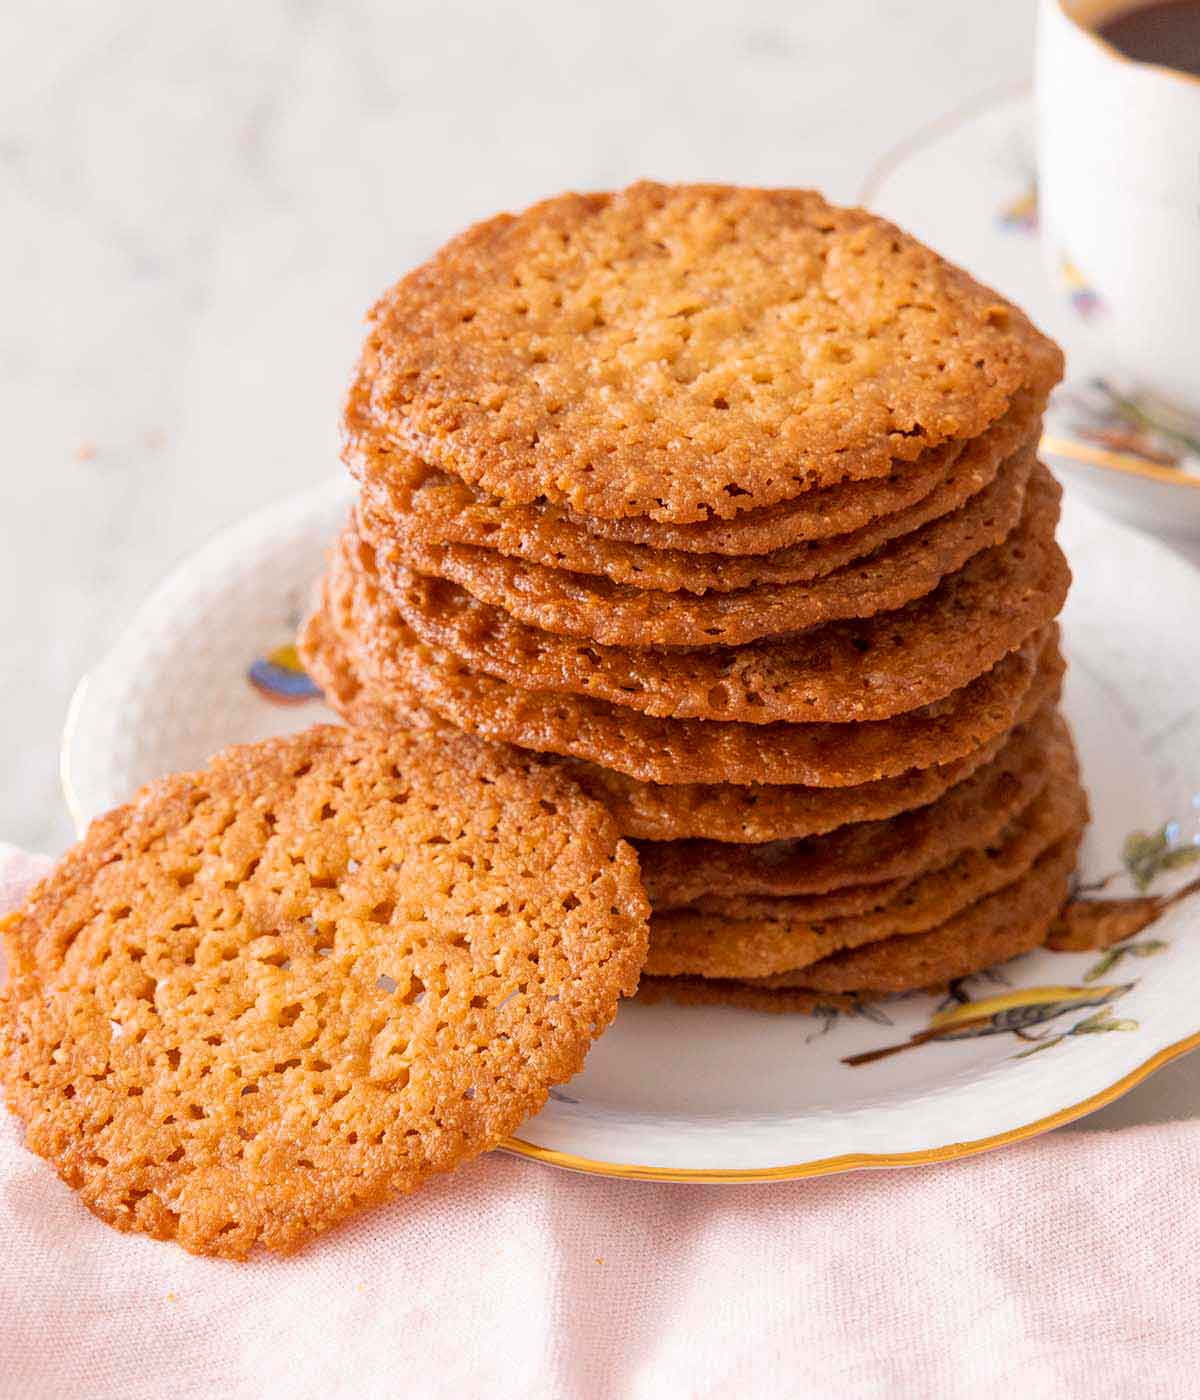 A stack of lace cookies with one in front.